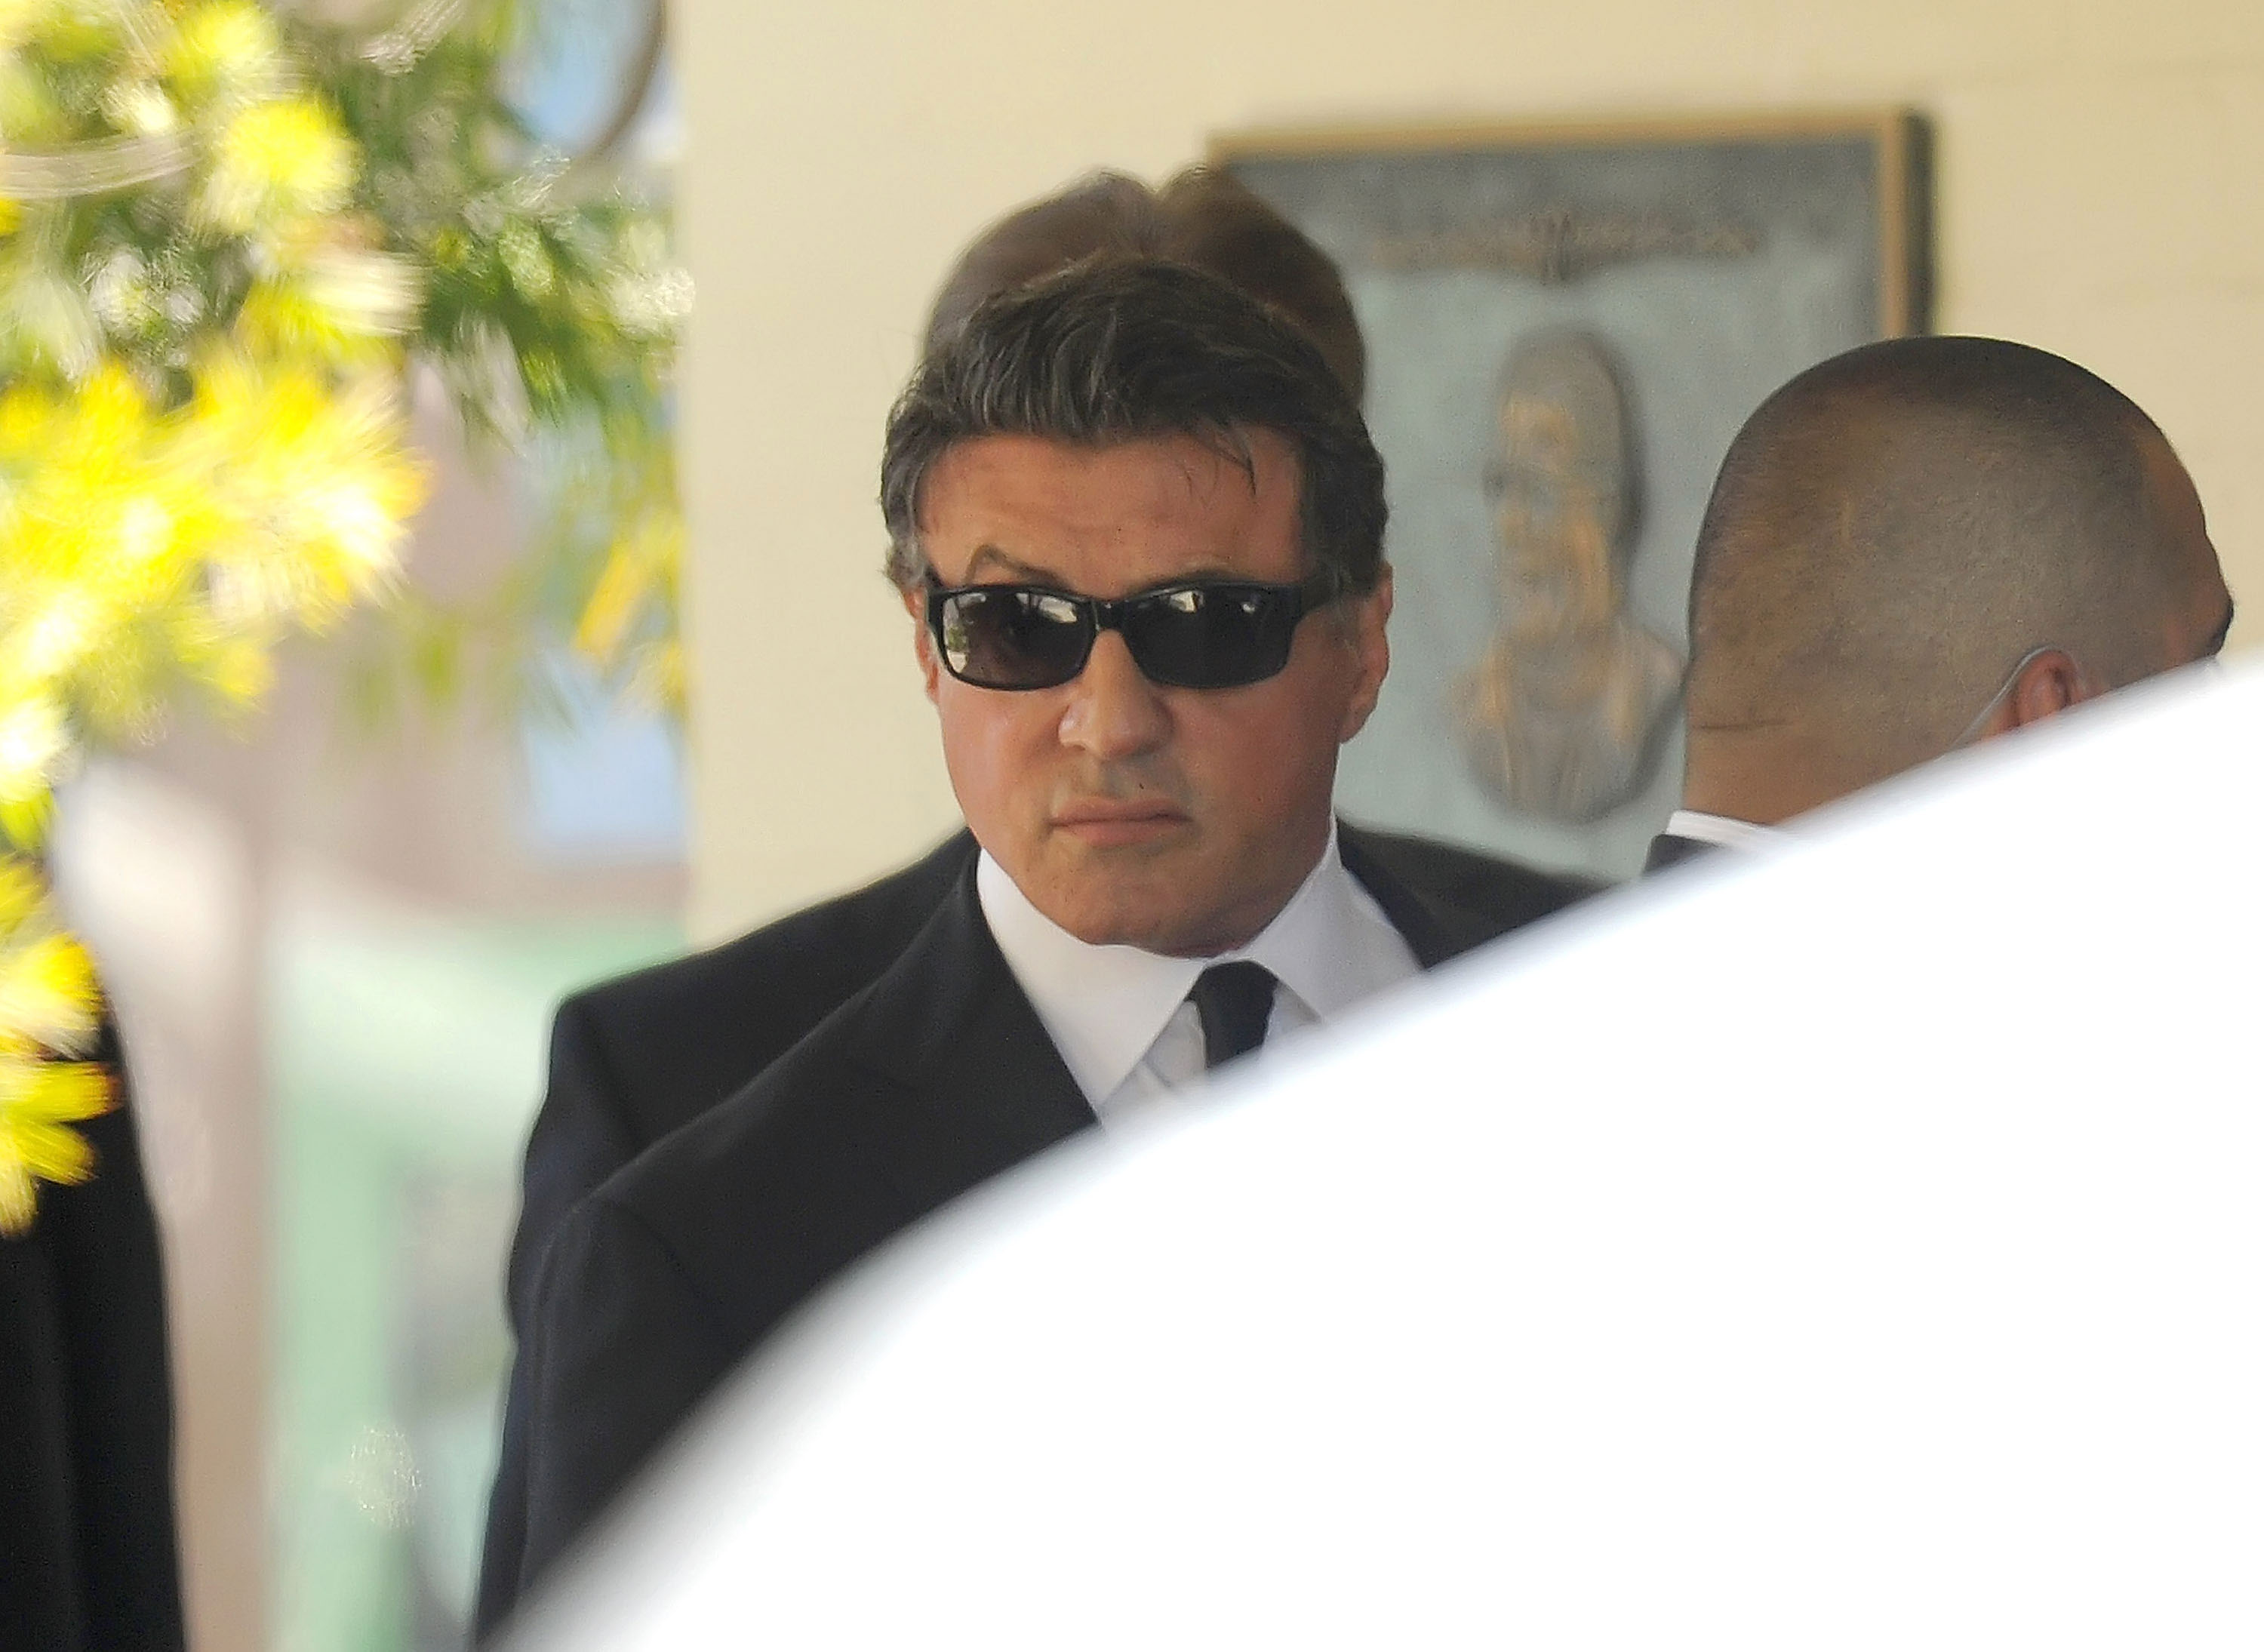 Sylvester Stallone attending the memorial service for his son, Sage Stallone, in Los Angeles, California, on July 21, 2012 | Source: Getty Images